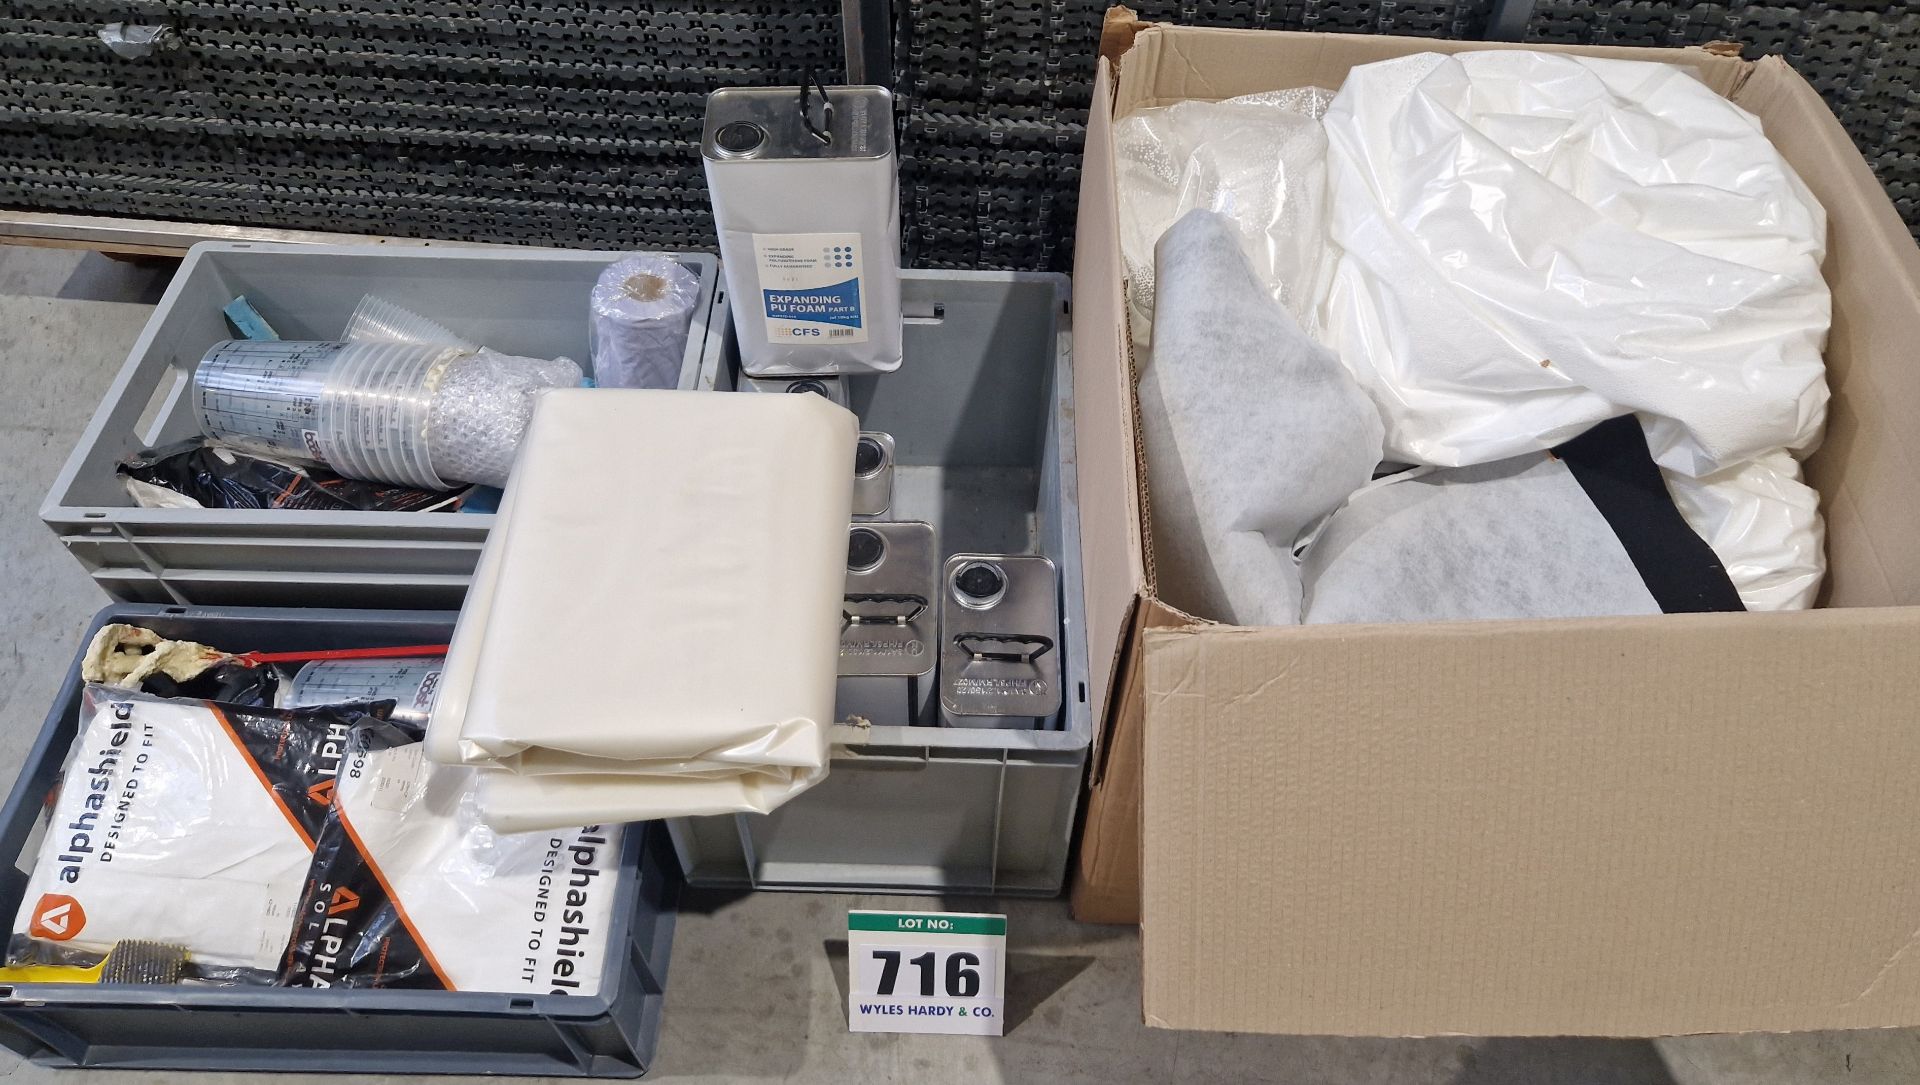 A Quantity of Foam Moulded Seat Making Chemicals and Accessories